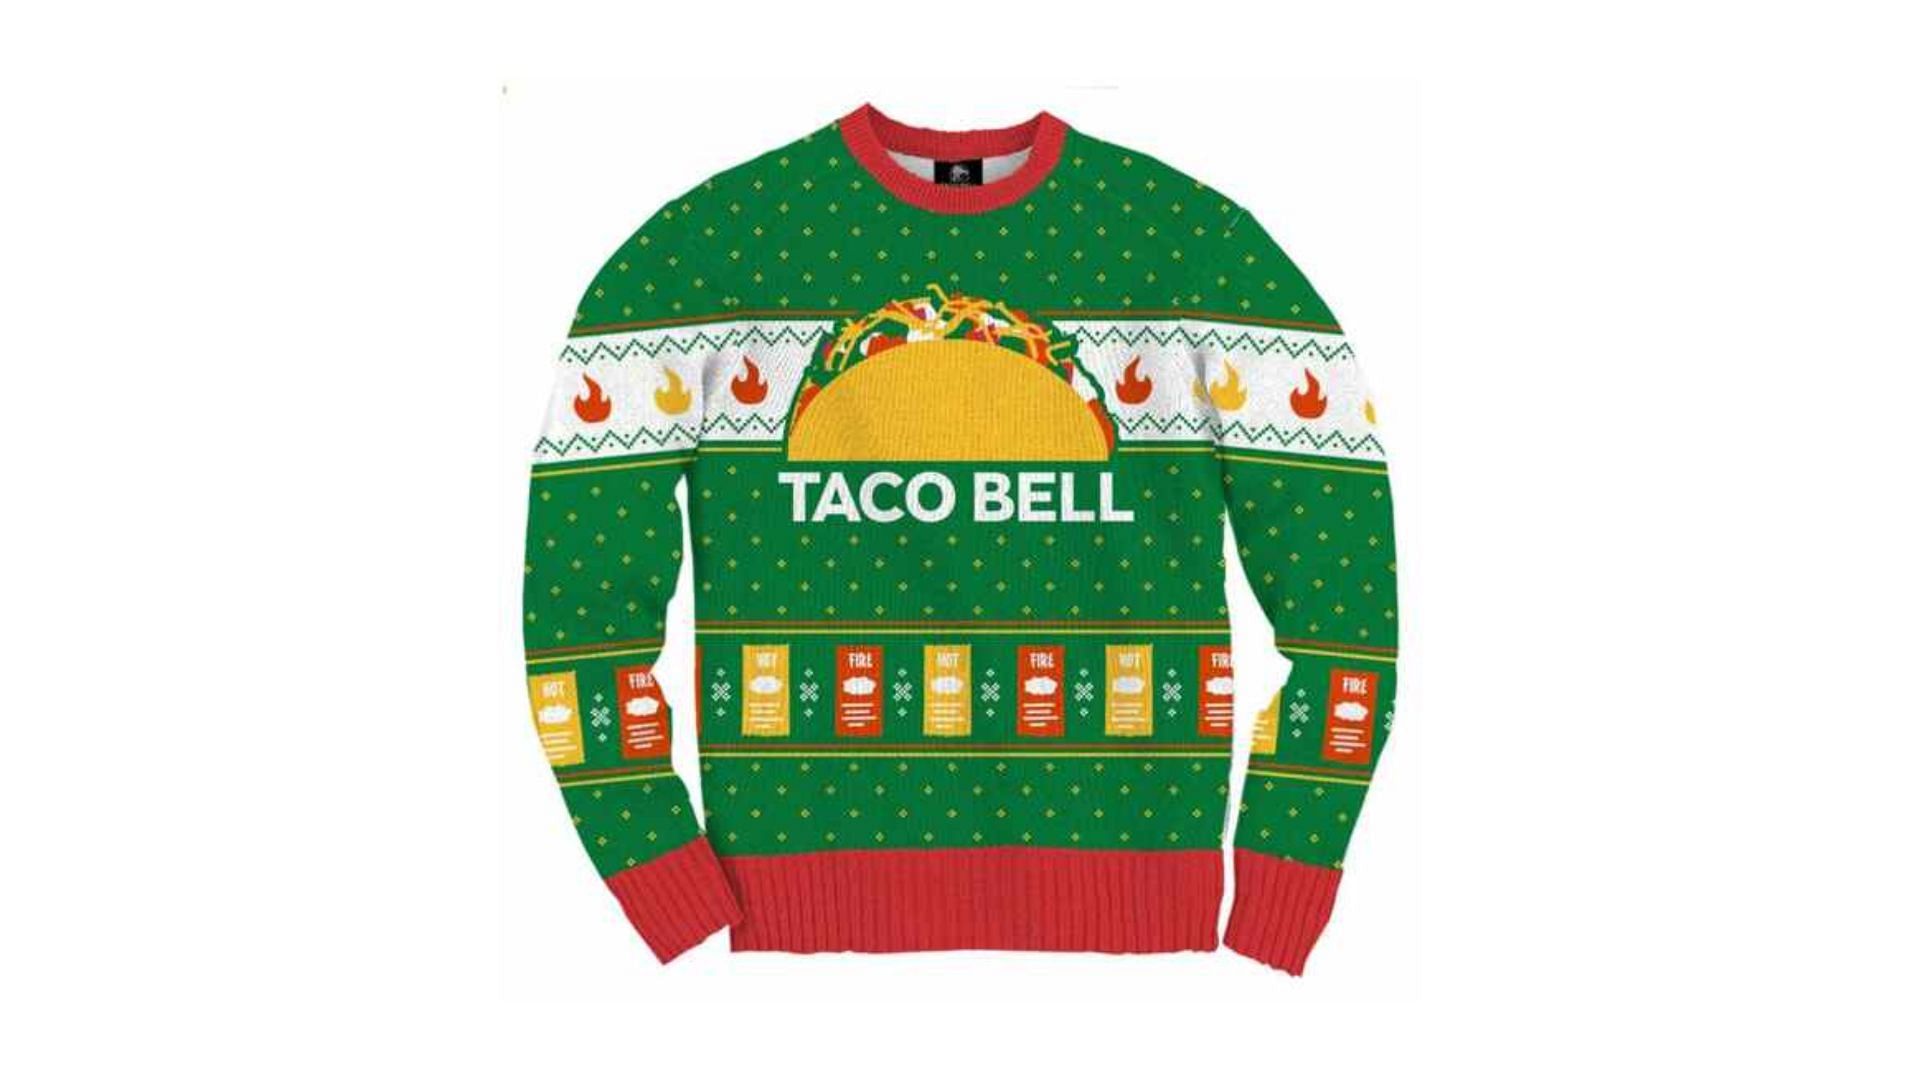 Going Mexican in a Taco Bell sweater (Image via Taco Bell)